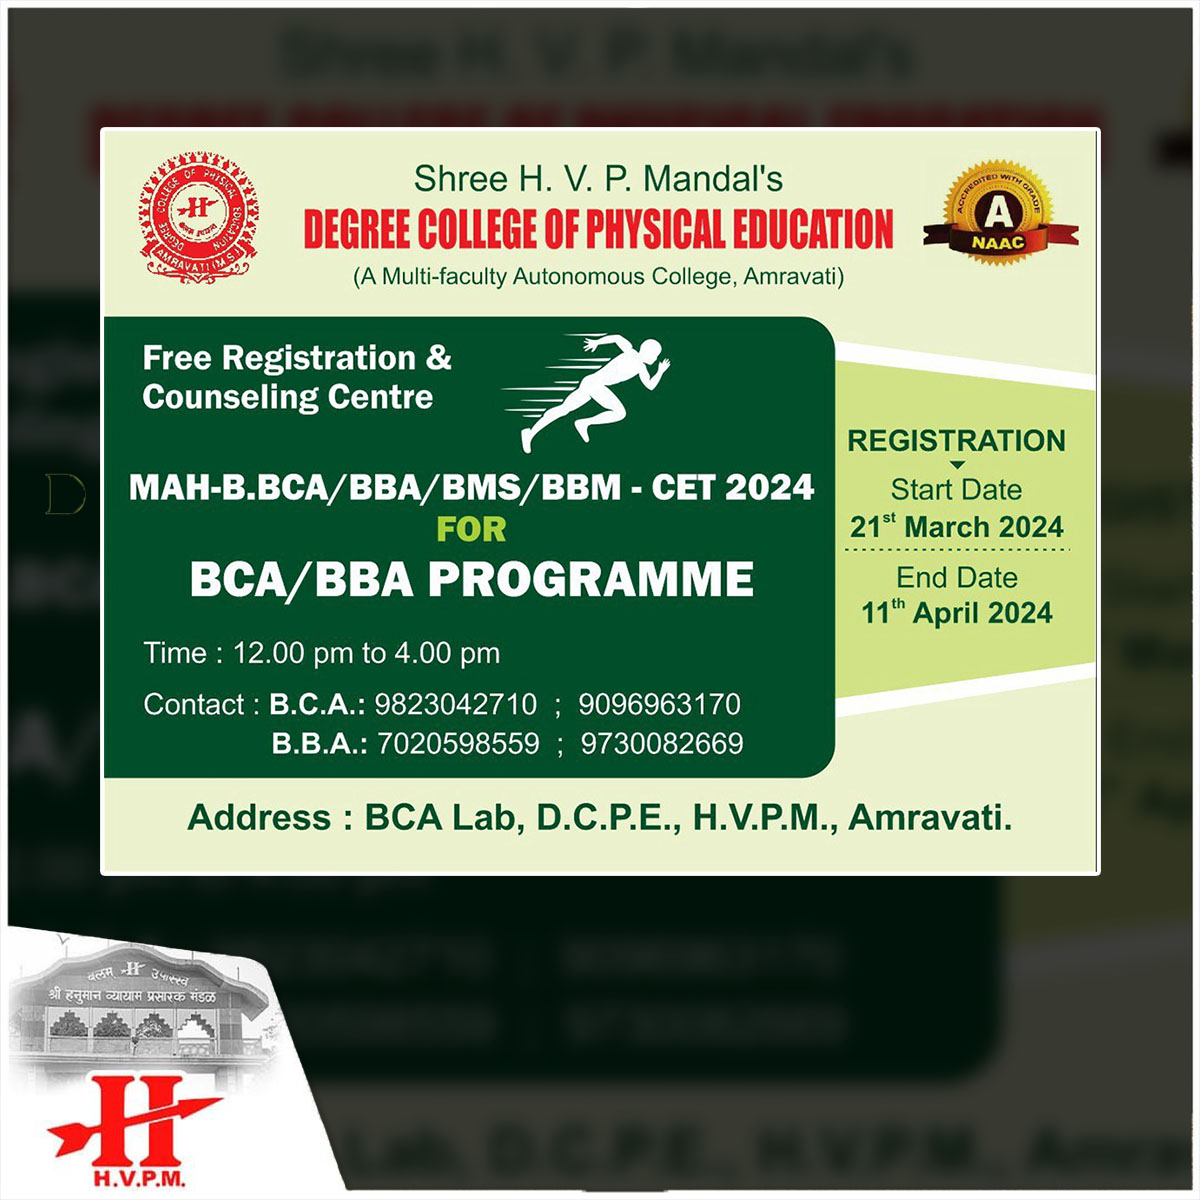 Starting this year, colleges offering BCA & BBA programs must have AICTE approval. Gear up to ace your MAH.B.BCA/BBA/BMS/BBM-CET 2024 if you're aiming for admission. Plus, Degree College of Physical Education is here to guide you with a FREE Registration and Counseling Center!